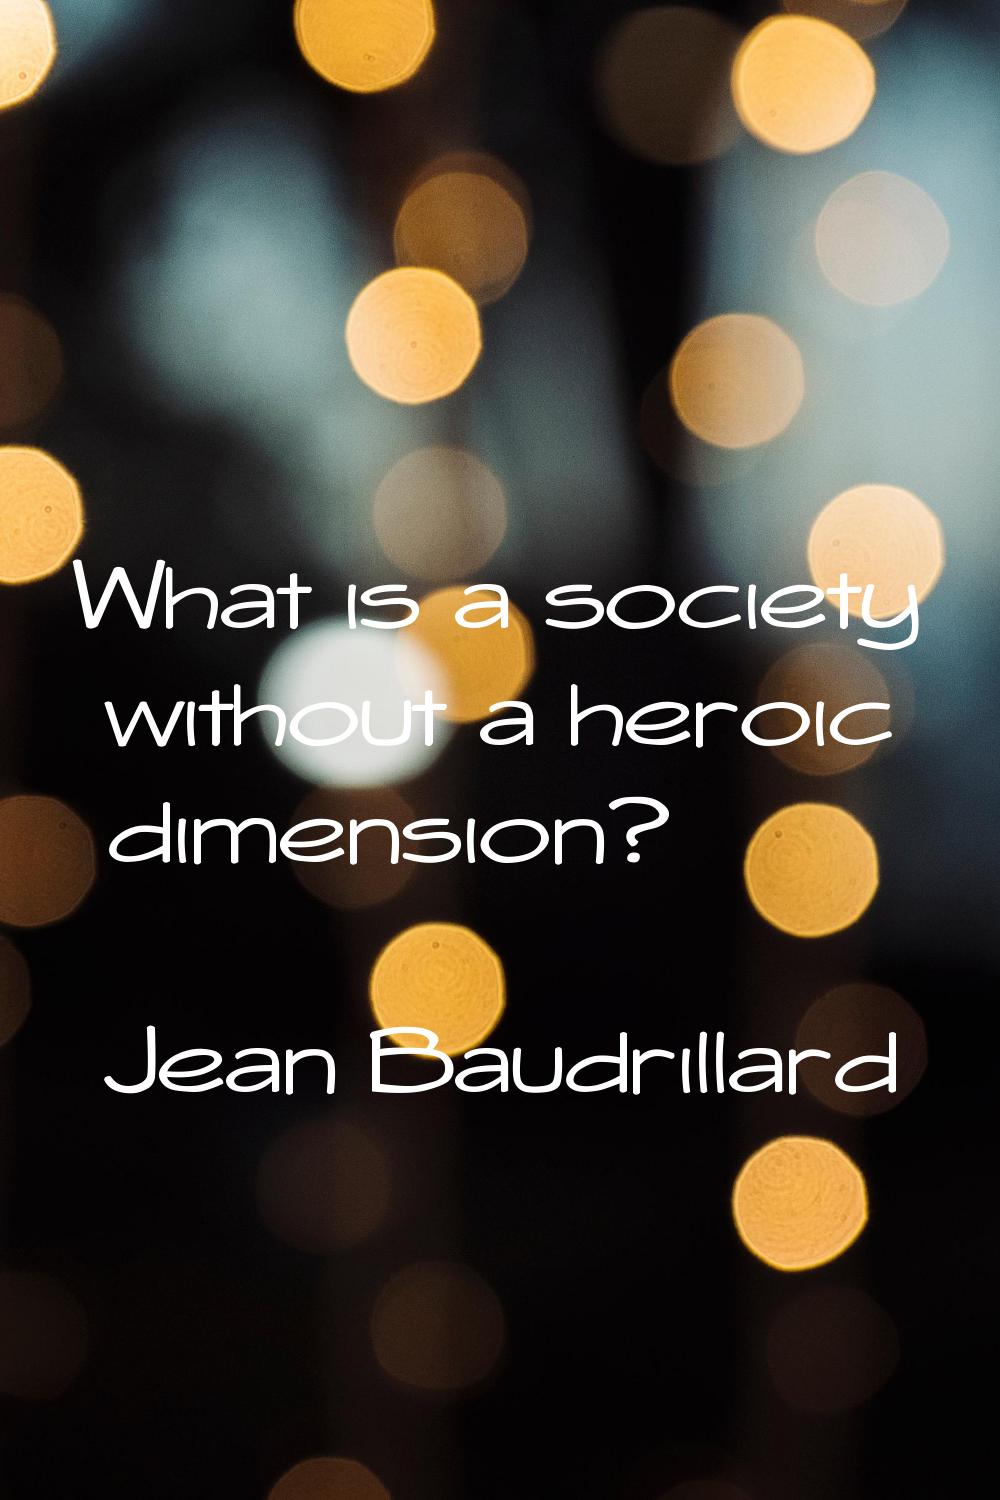 What is a society without a heroic dimension?